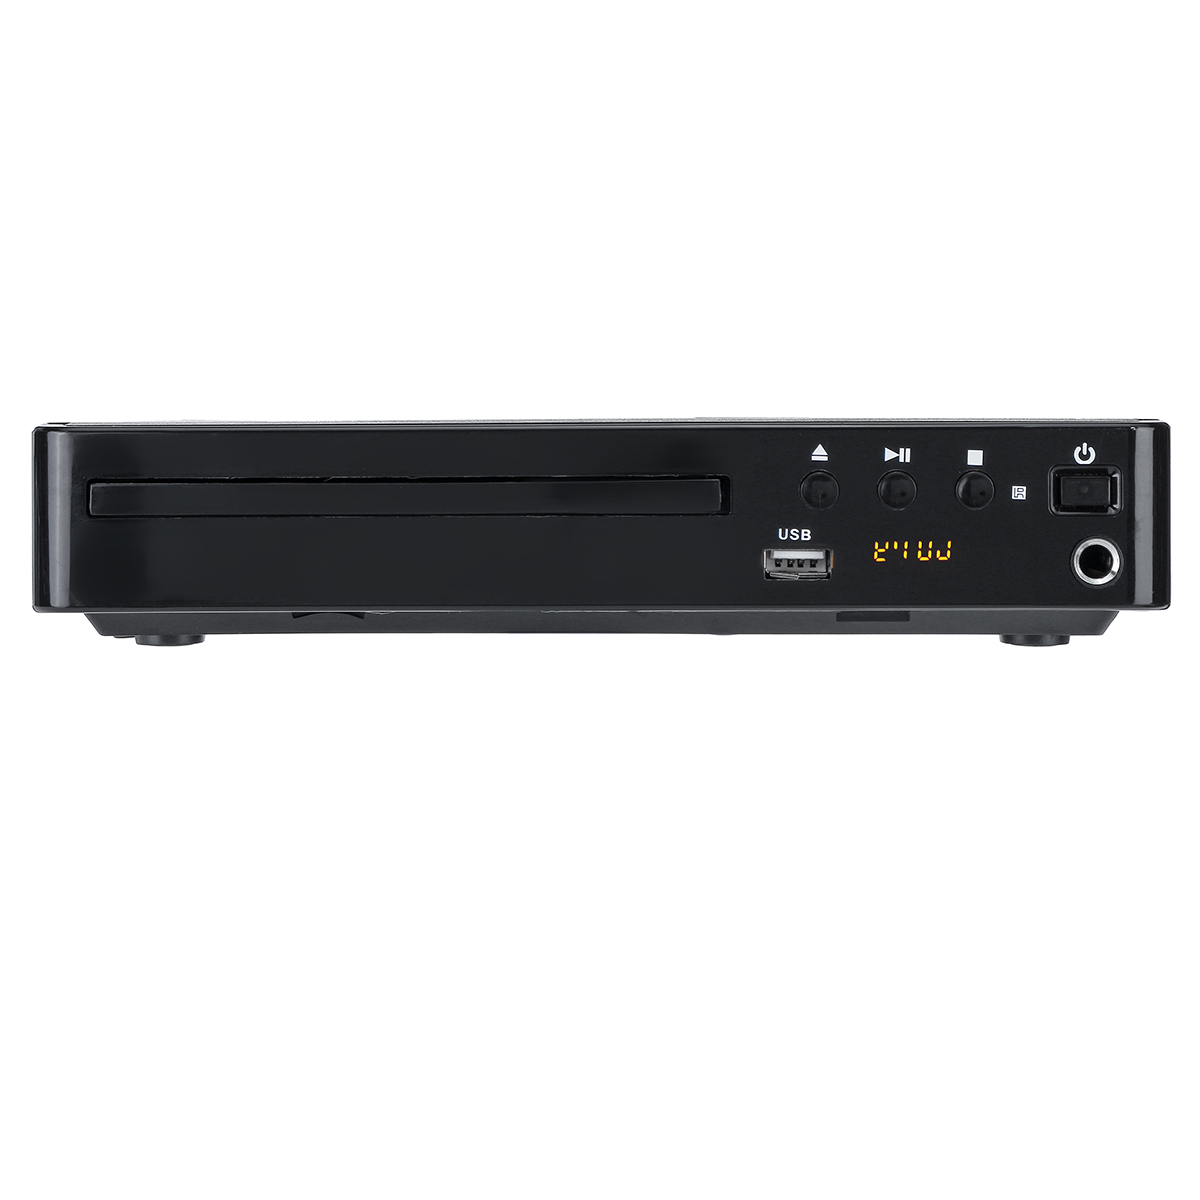 1080P-Full-HD-LCD-DVD-Player-Compact-6-Region-Stereo-Video-MP4-MP3-CD-USB-Remote-1699901-3